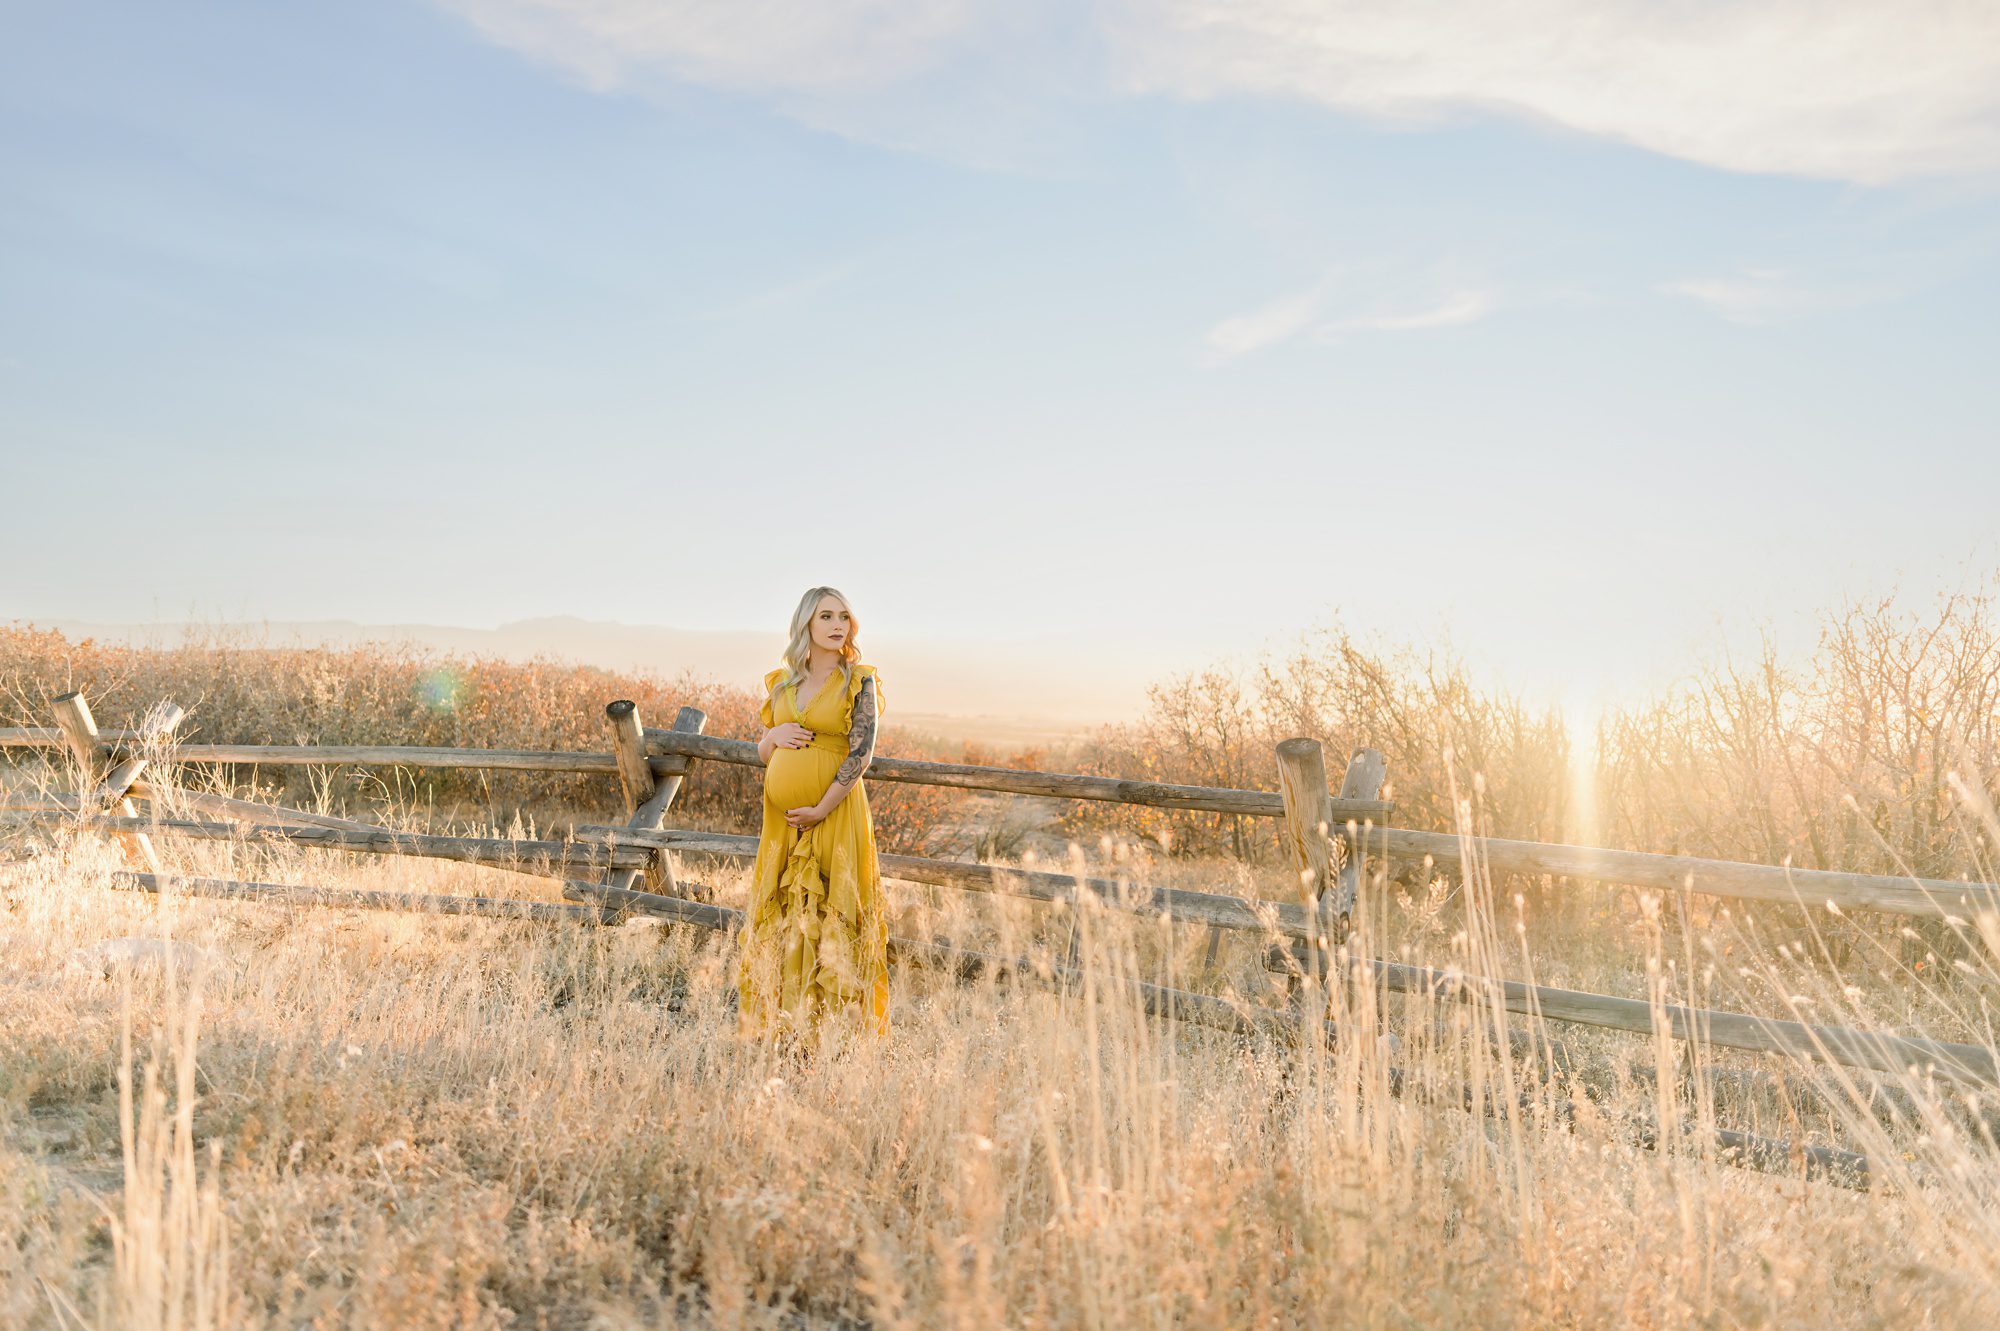 A young mom and her 1 year old son get maternity photos in a picturesque field location in the suburbs of Denver Colorado. 